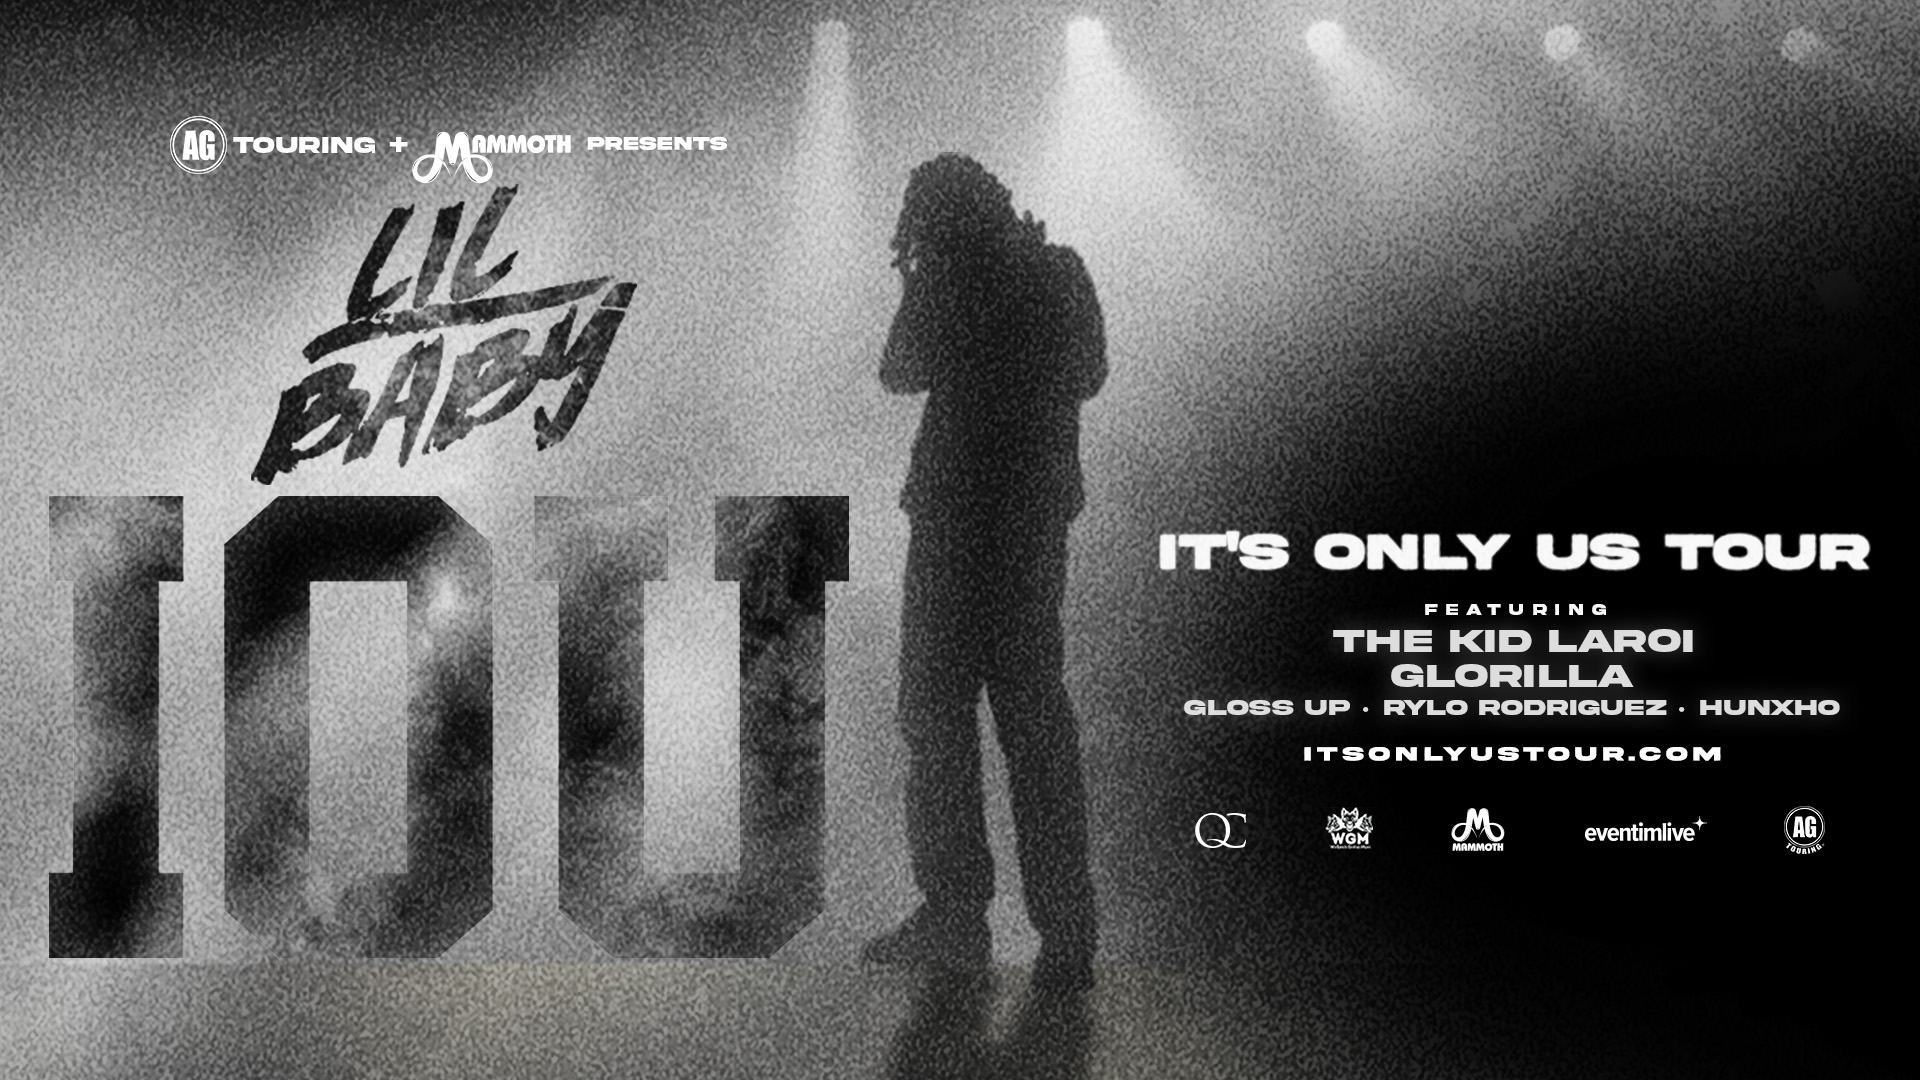 Lil Baby - It's Only Us Tour